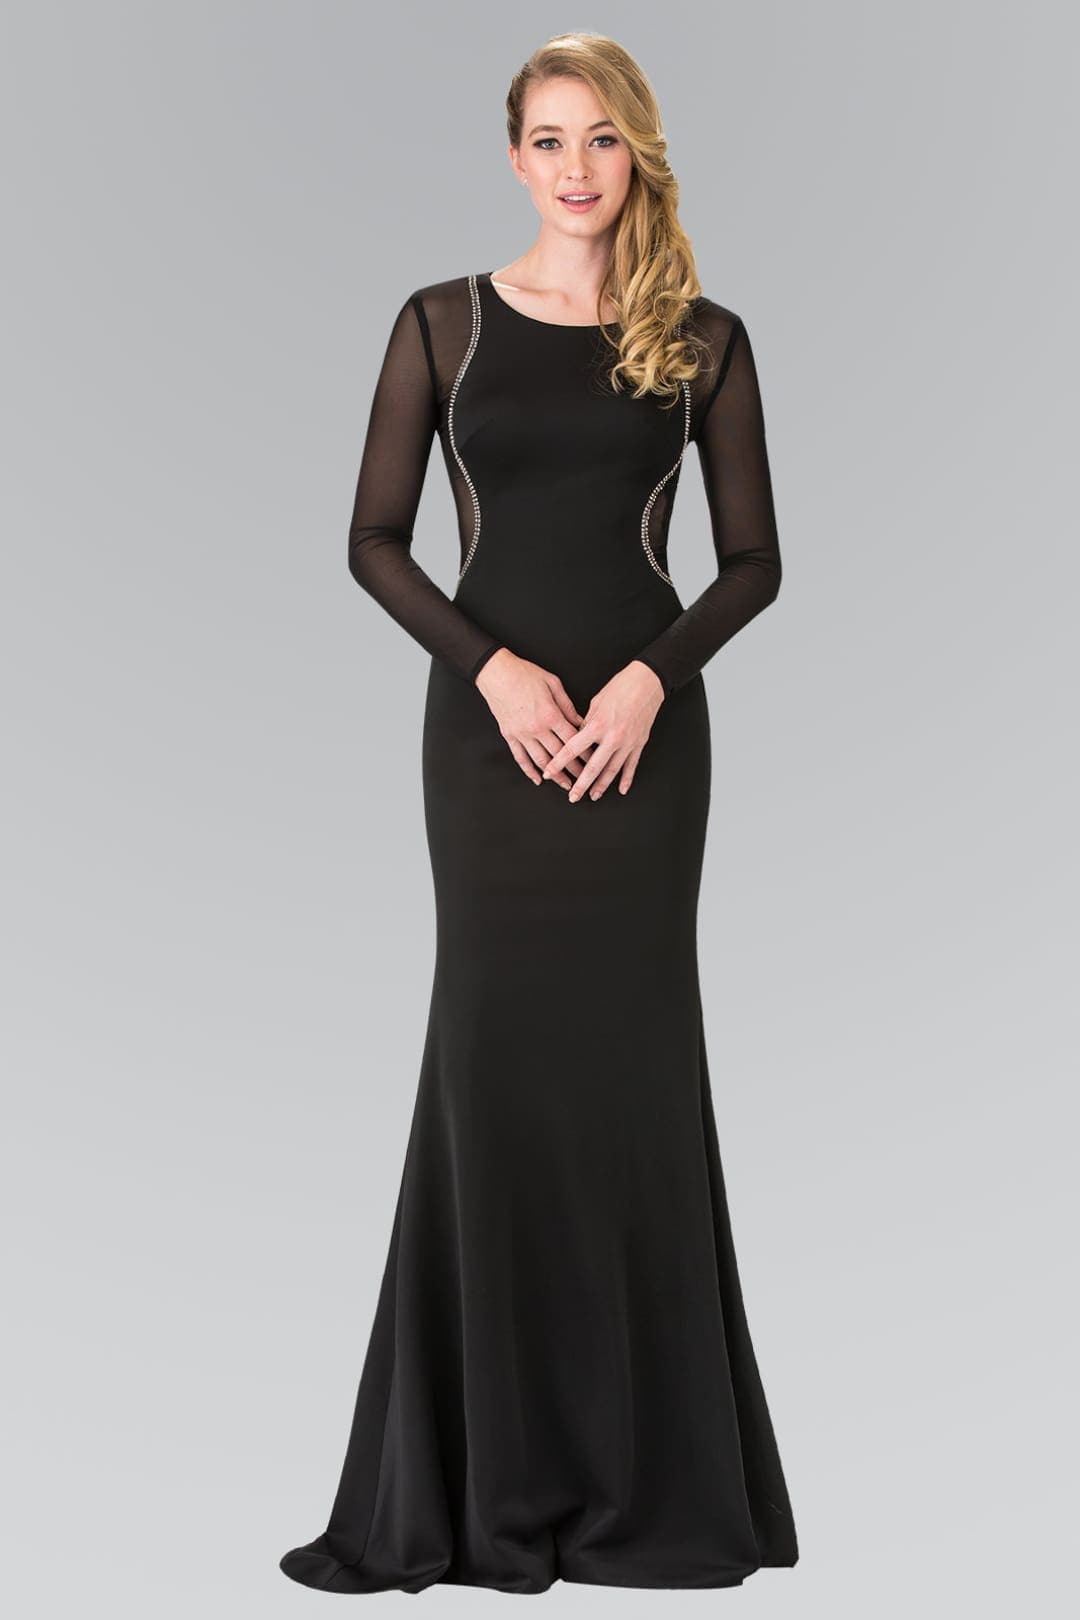 Long Sleeve Formal Gown - BLACK / XS